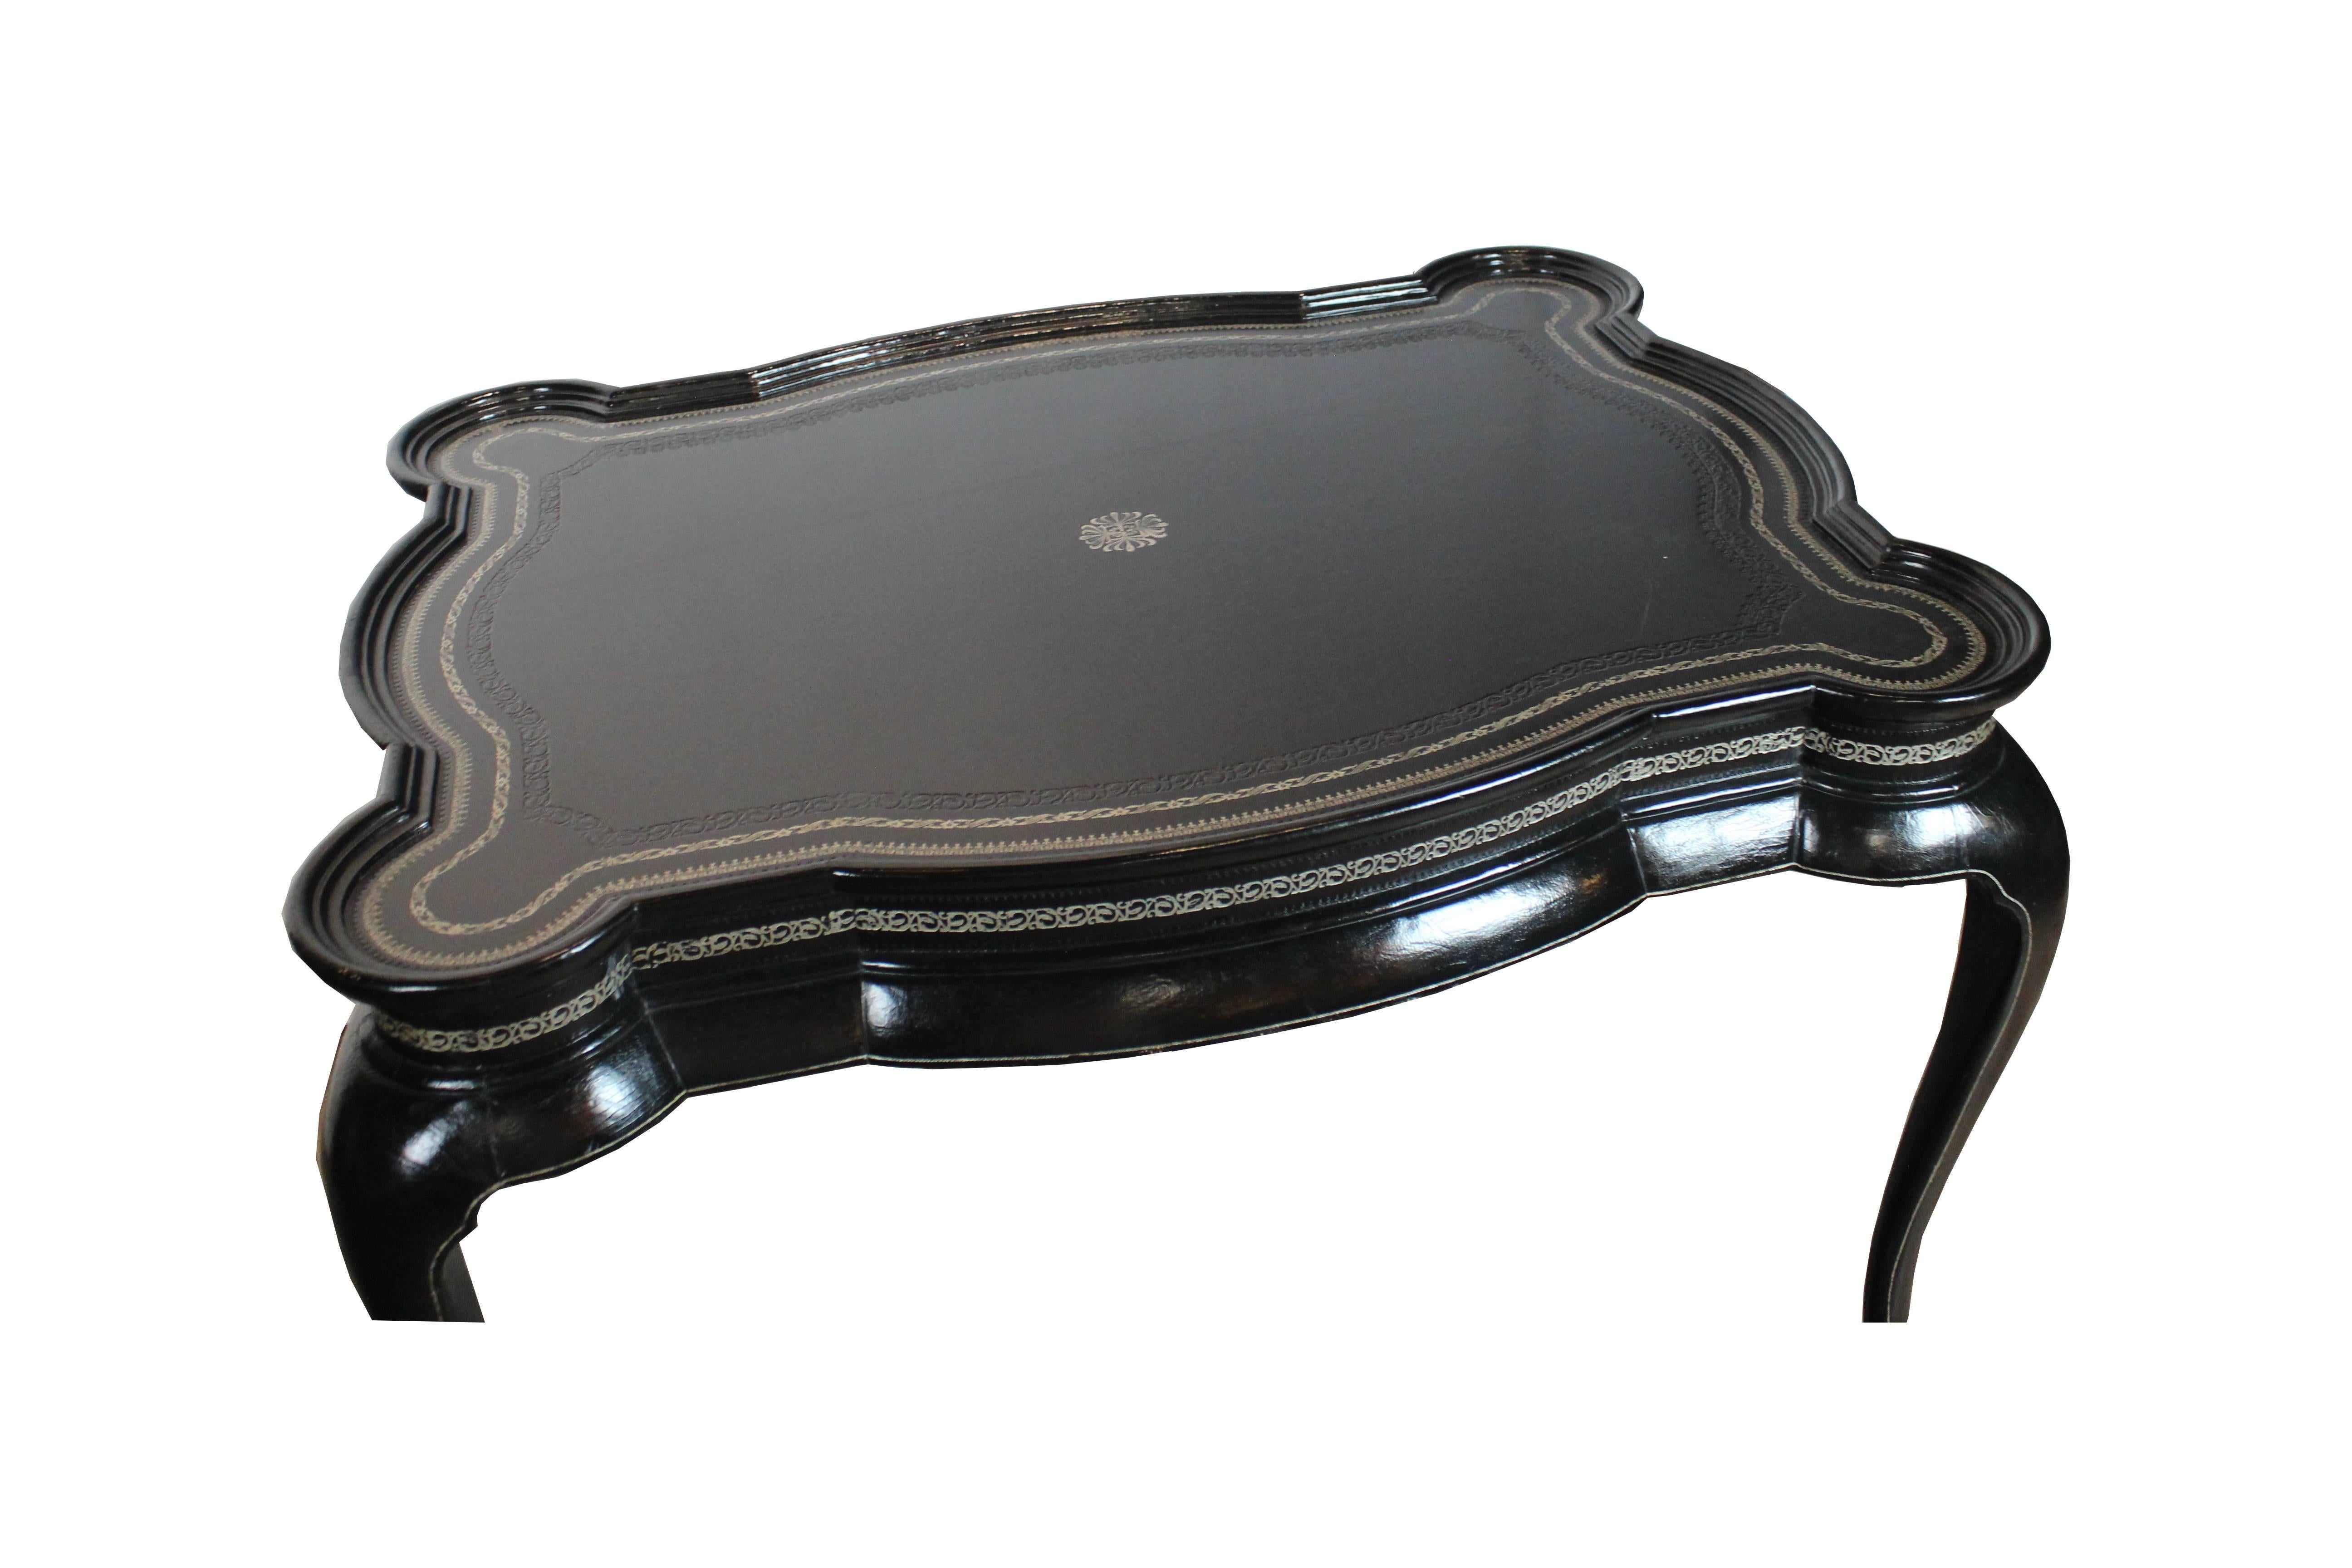 Black leather coffee table with Greek motif silver decoration on the edge.